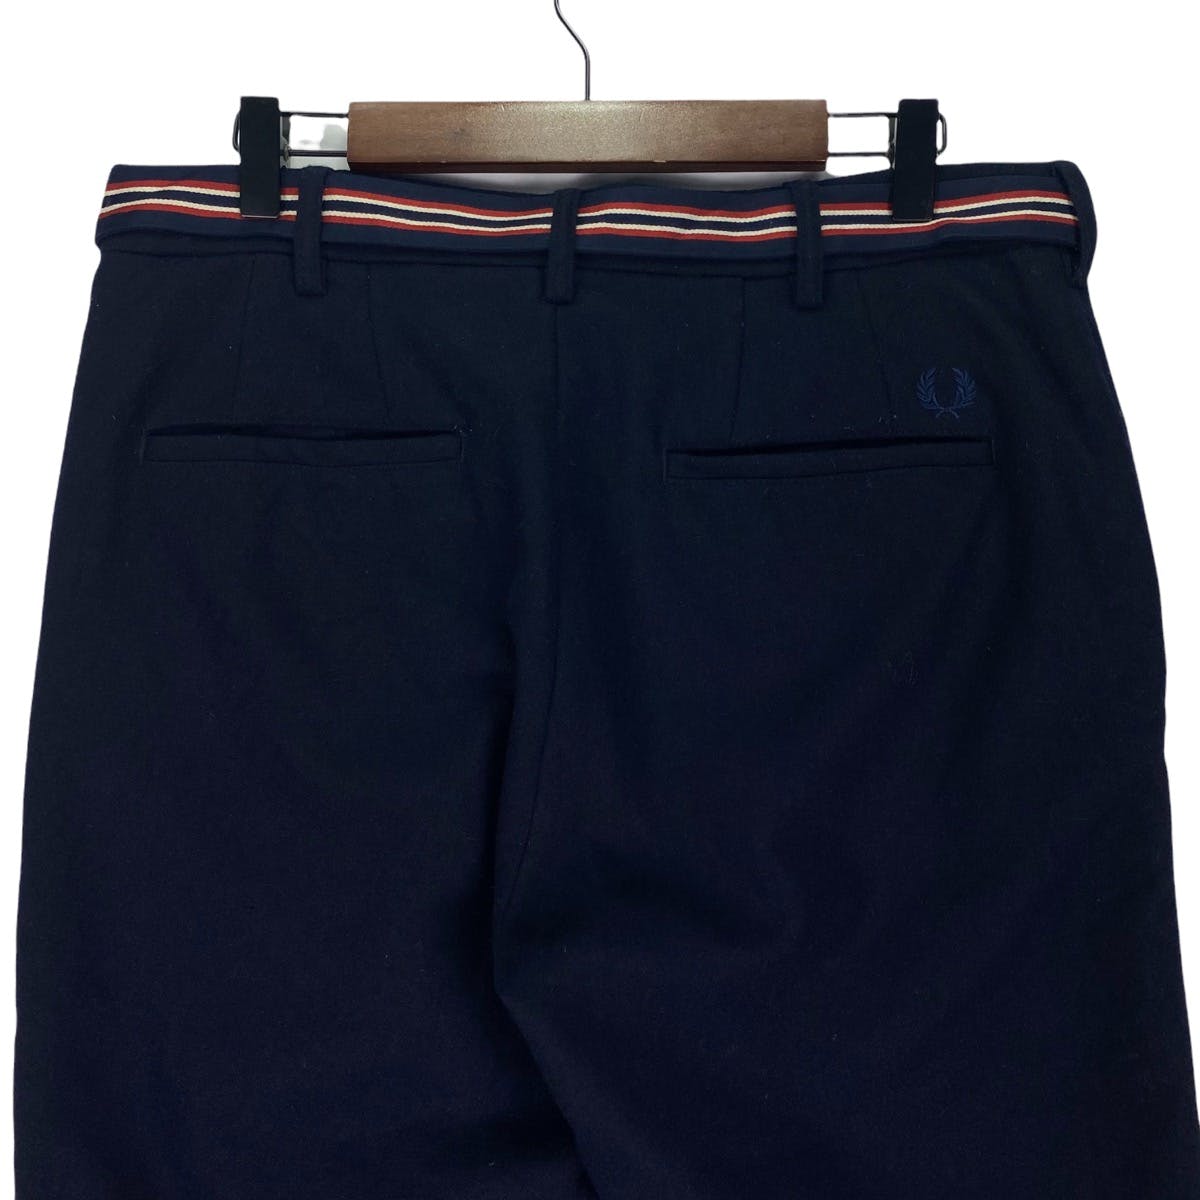 Fred Perry Navy Blue Trouser - 6